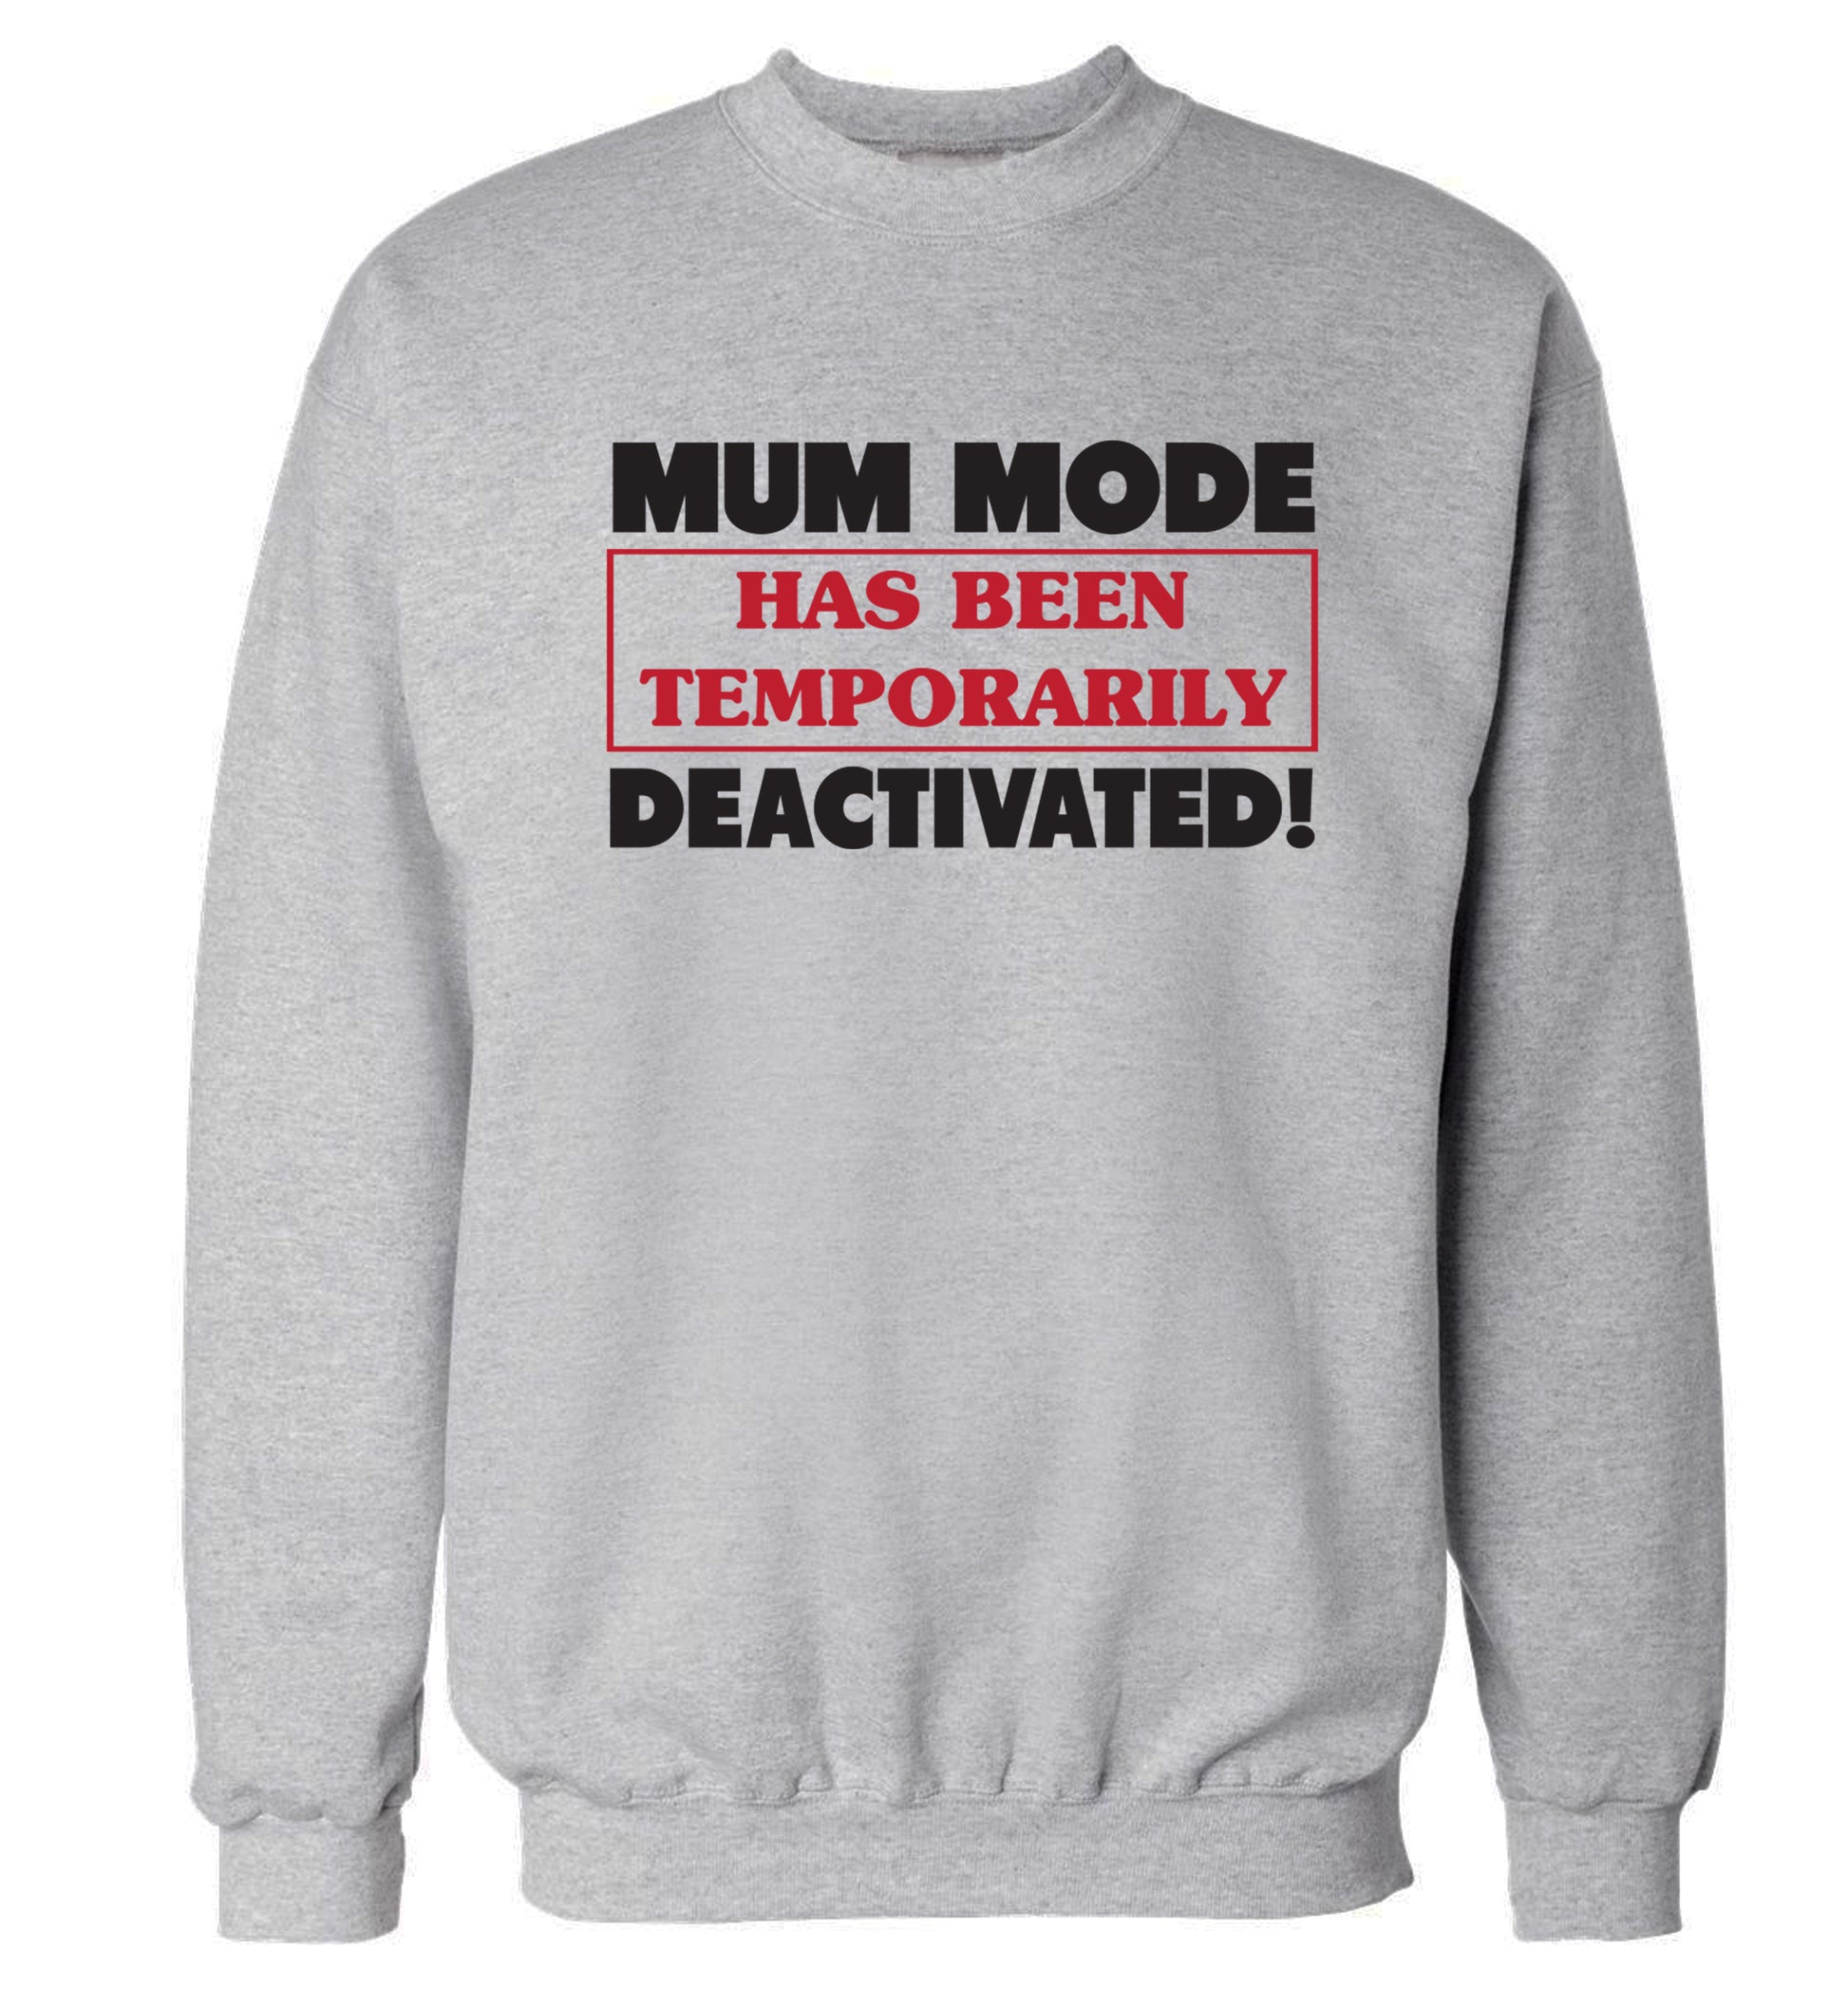 Mum mode has been temporarily deactivated! Adult's unisex grey Sweater 2XL